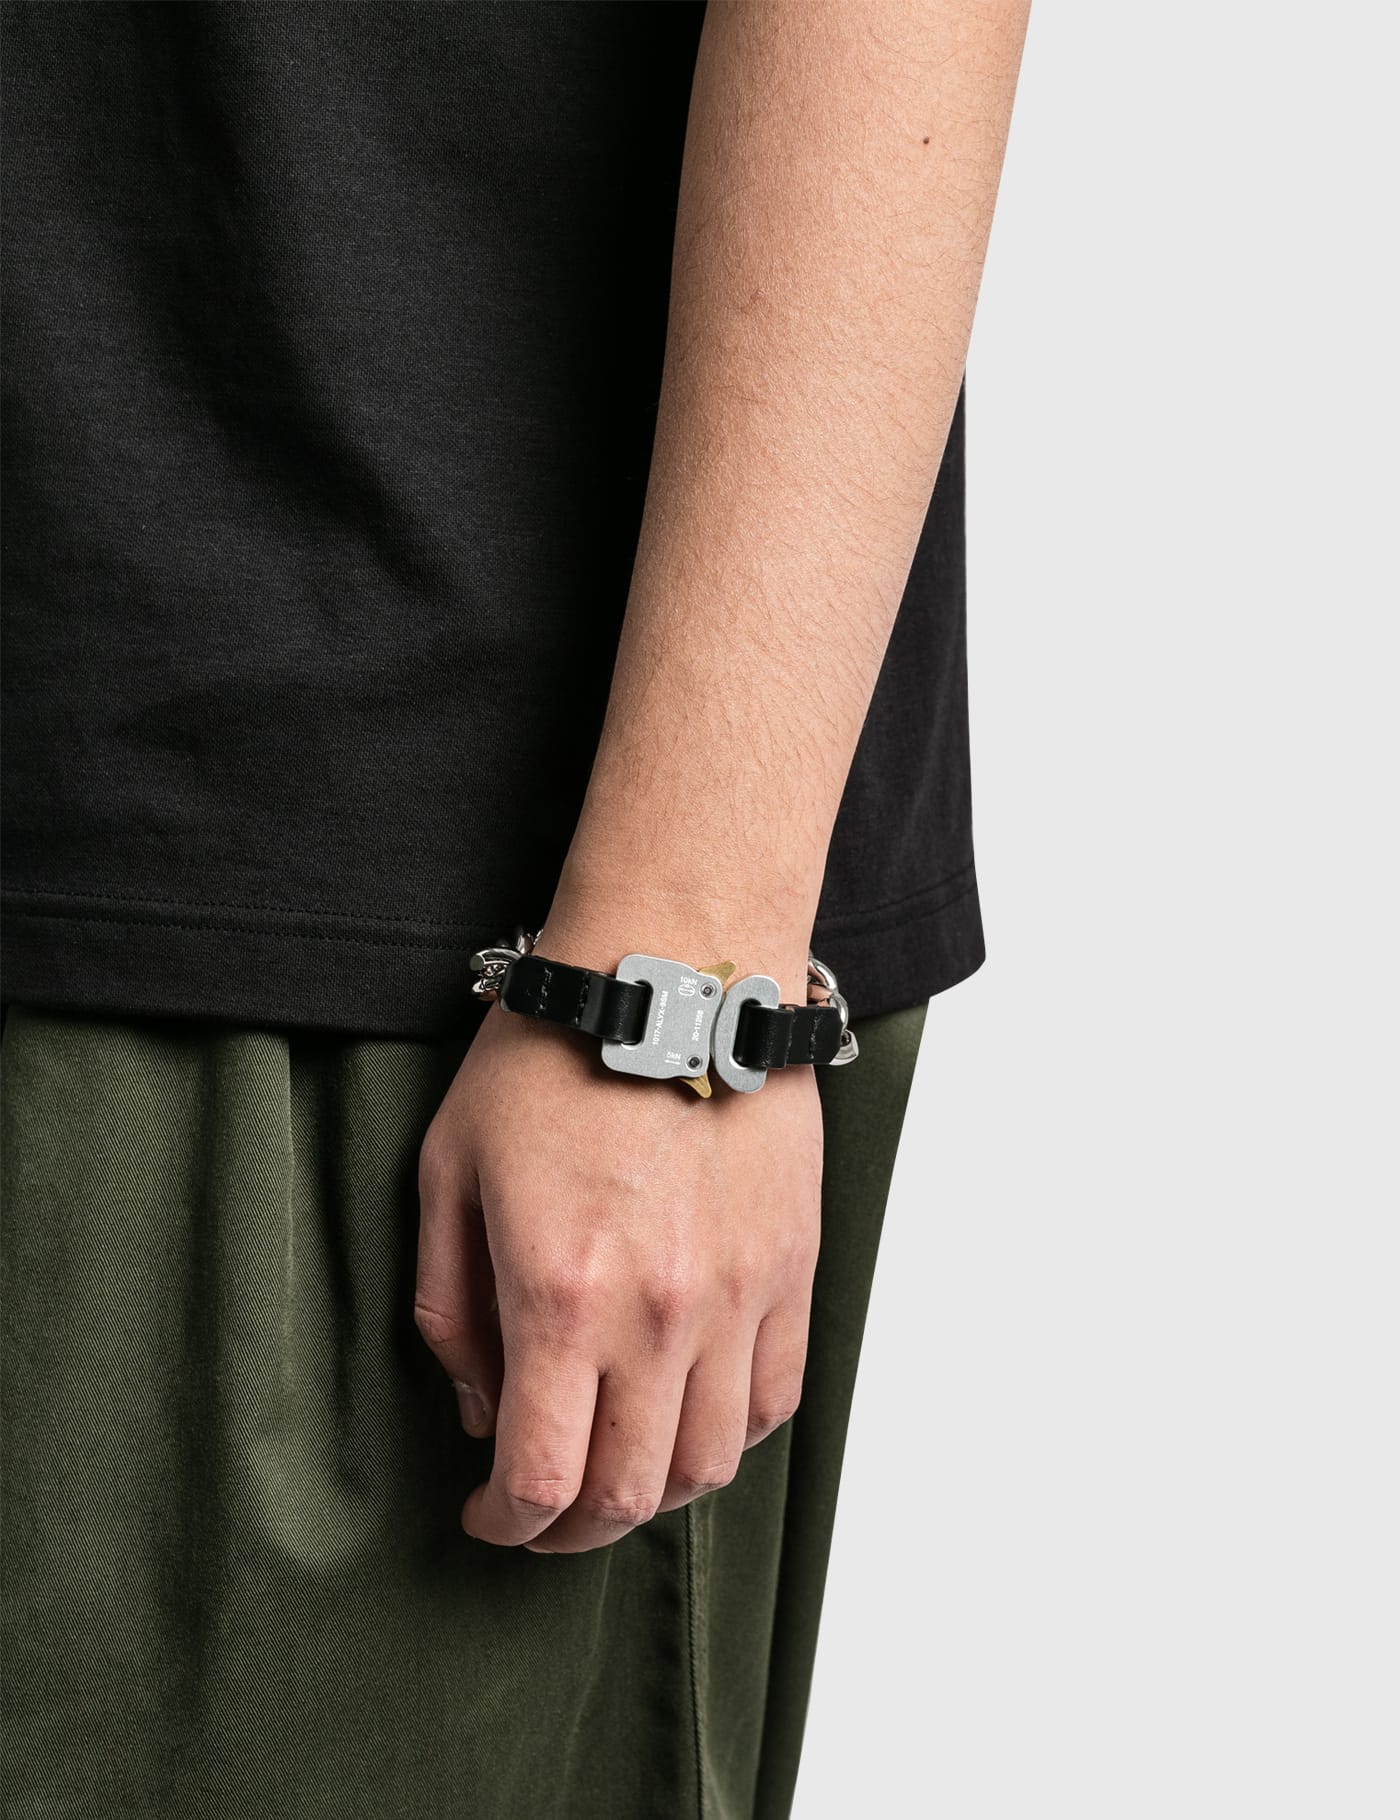 More Accessories and Ready-To-Wear Staples From 1017-ALYX-9SM at JUICE –  JUICESTORE